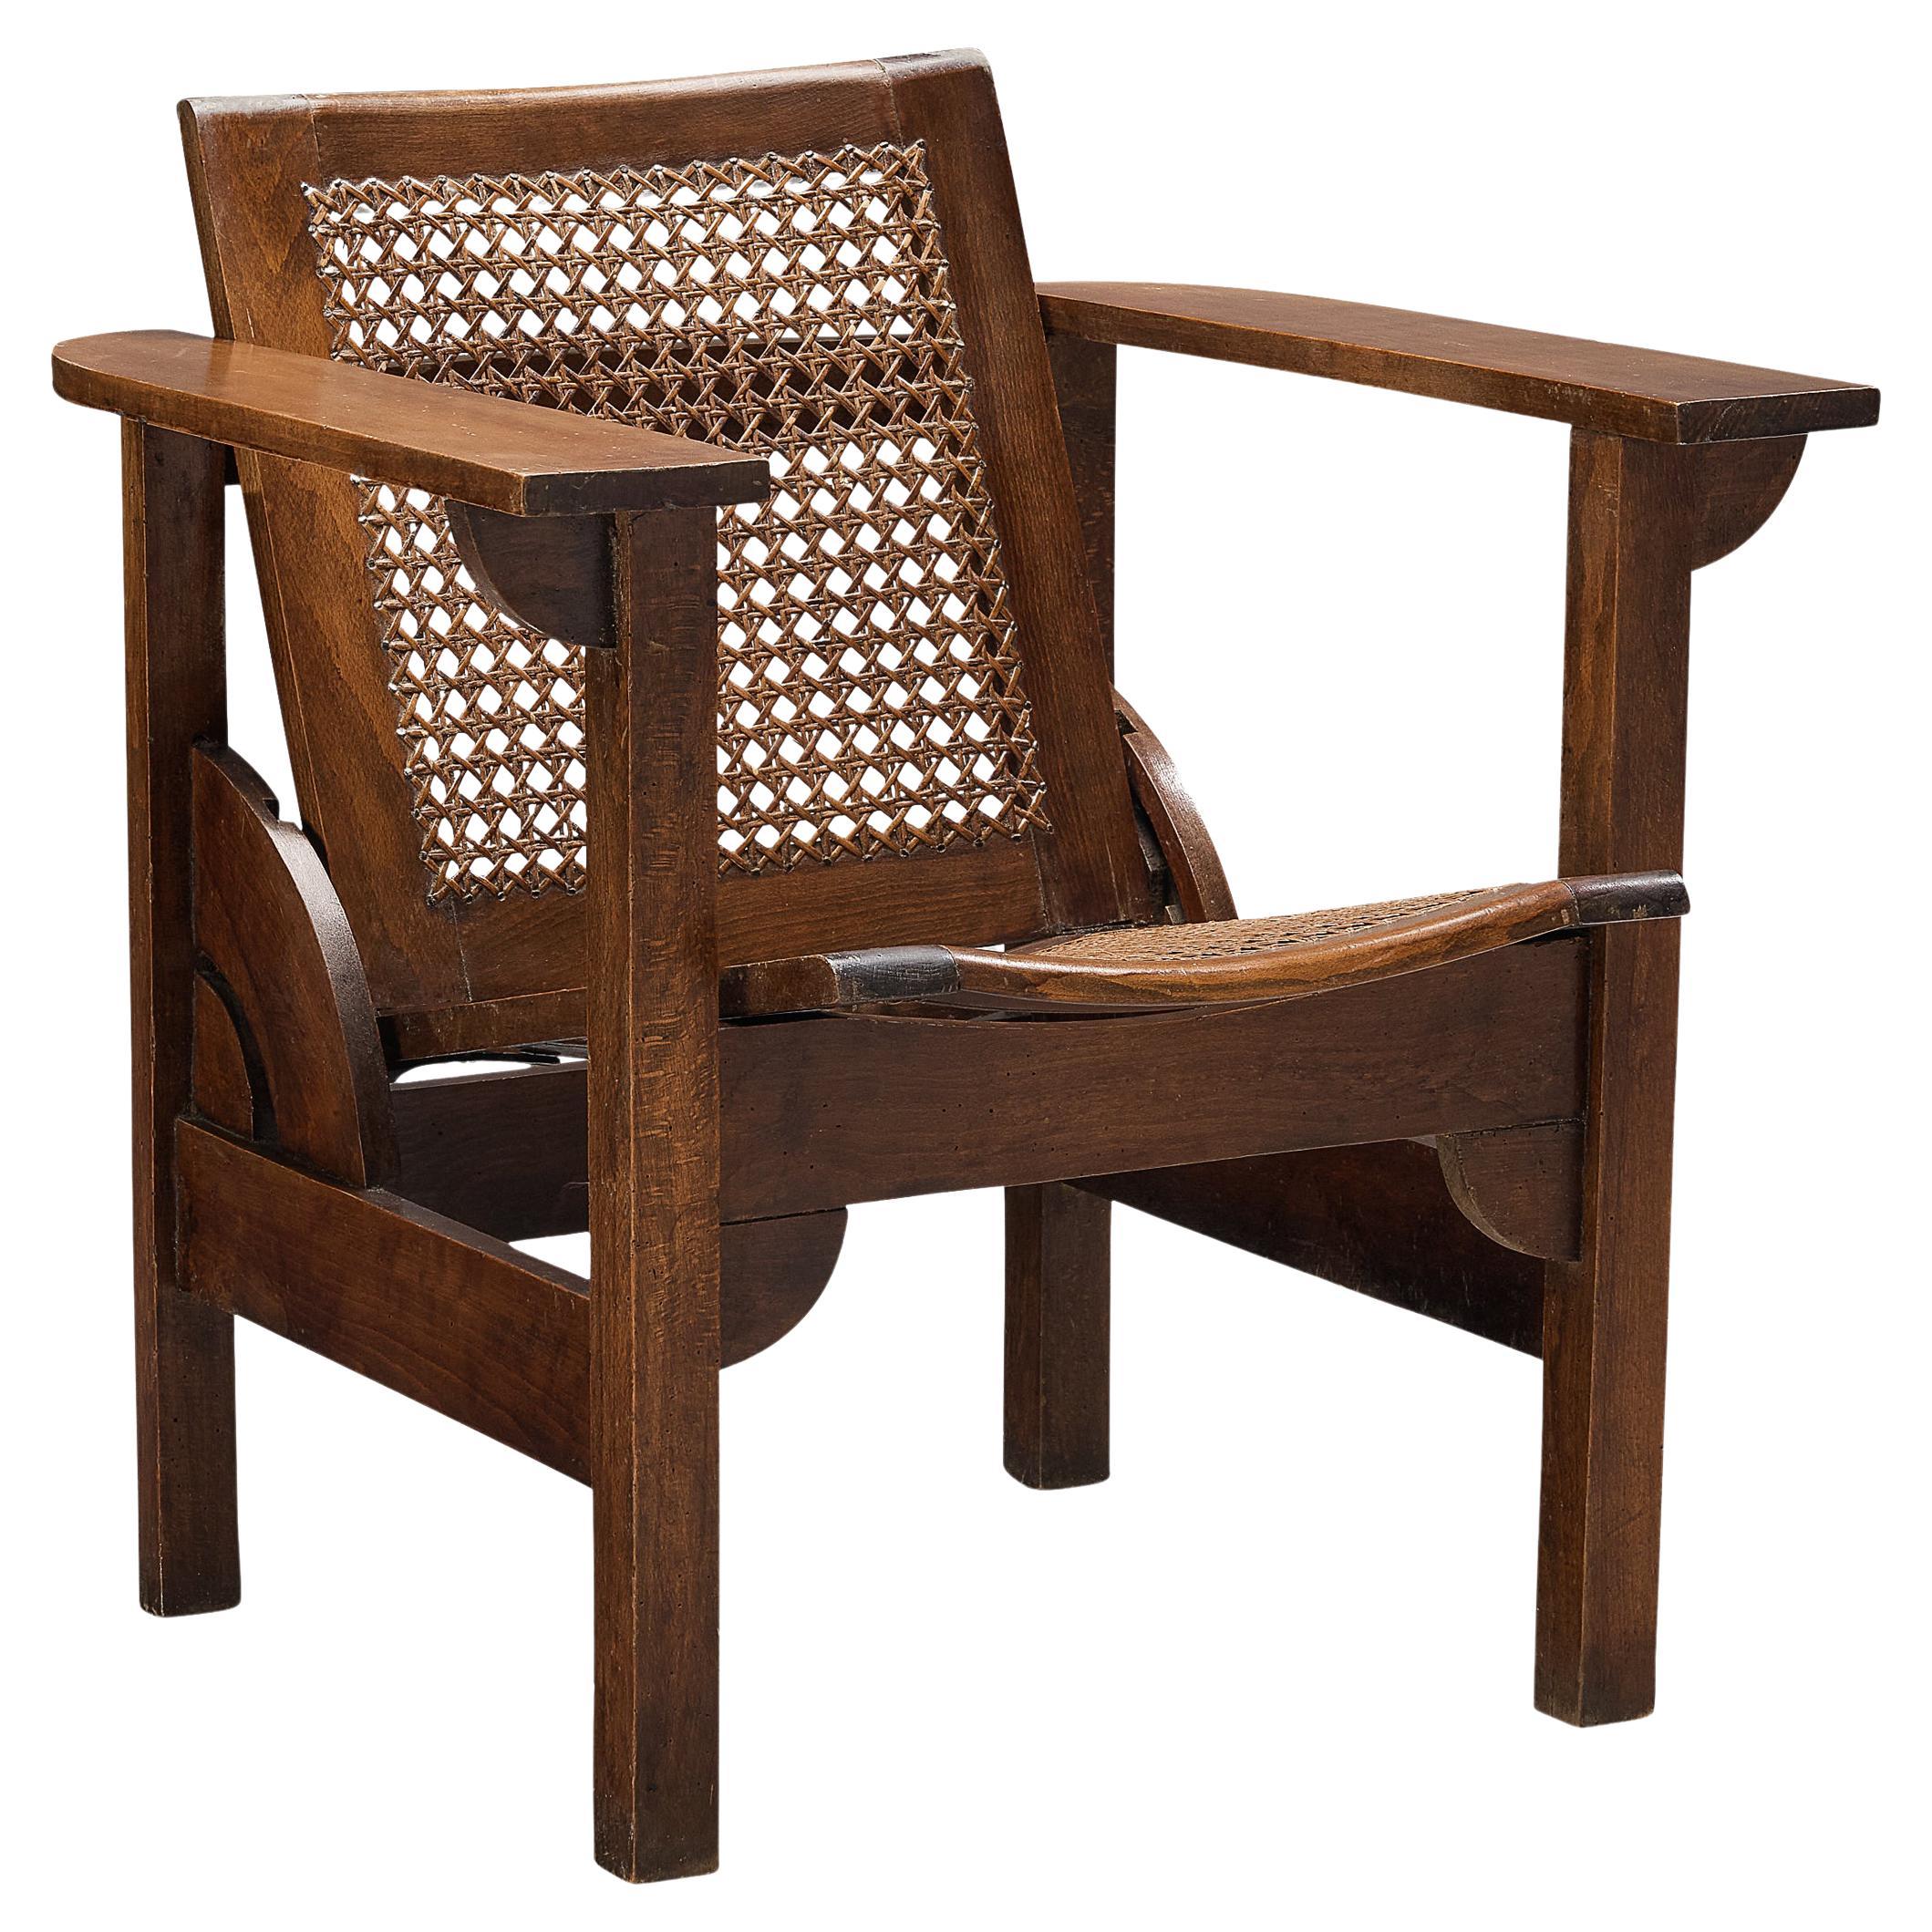 Pierre Dariel 'Hendaye' Armchair in Dark Stained Wood and Cane